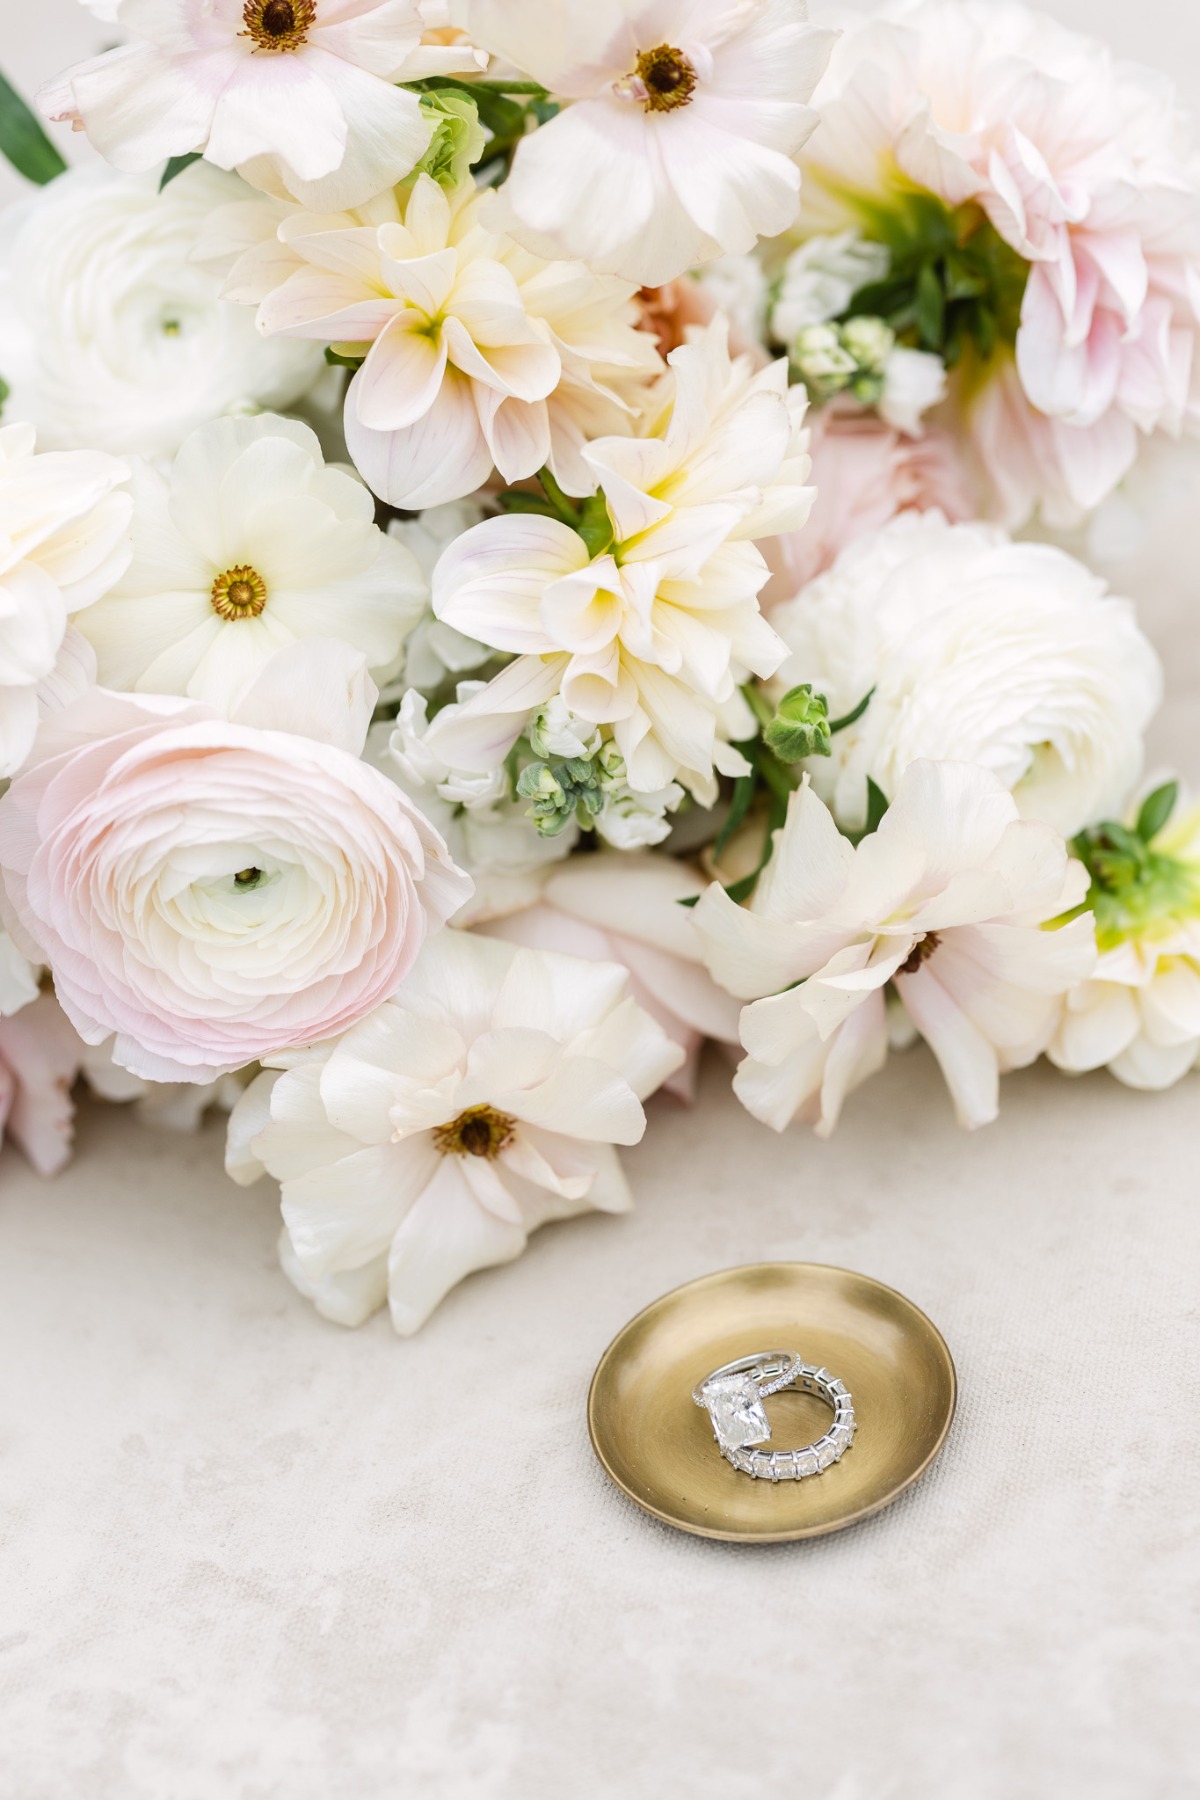 Florals and glam wedding ring set